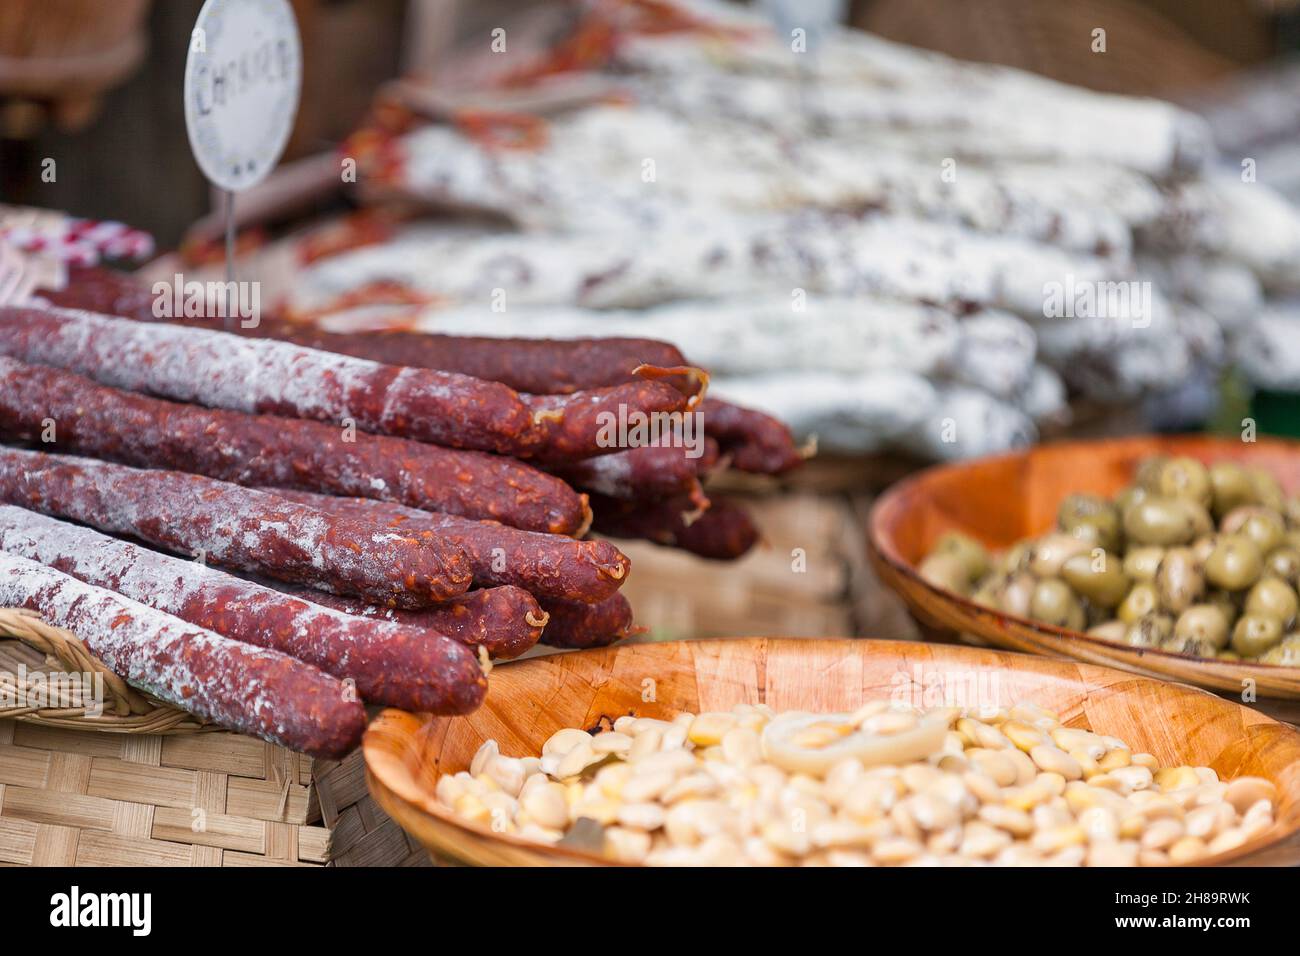 Stack of chorizo sausages and other delicacies for sale on a market stall. Stock Photo